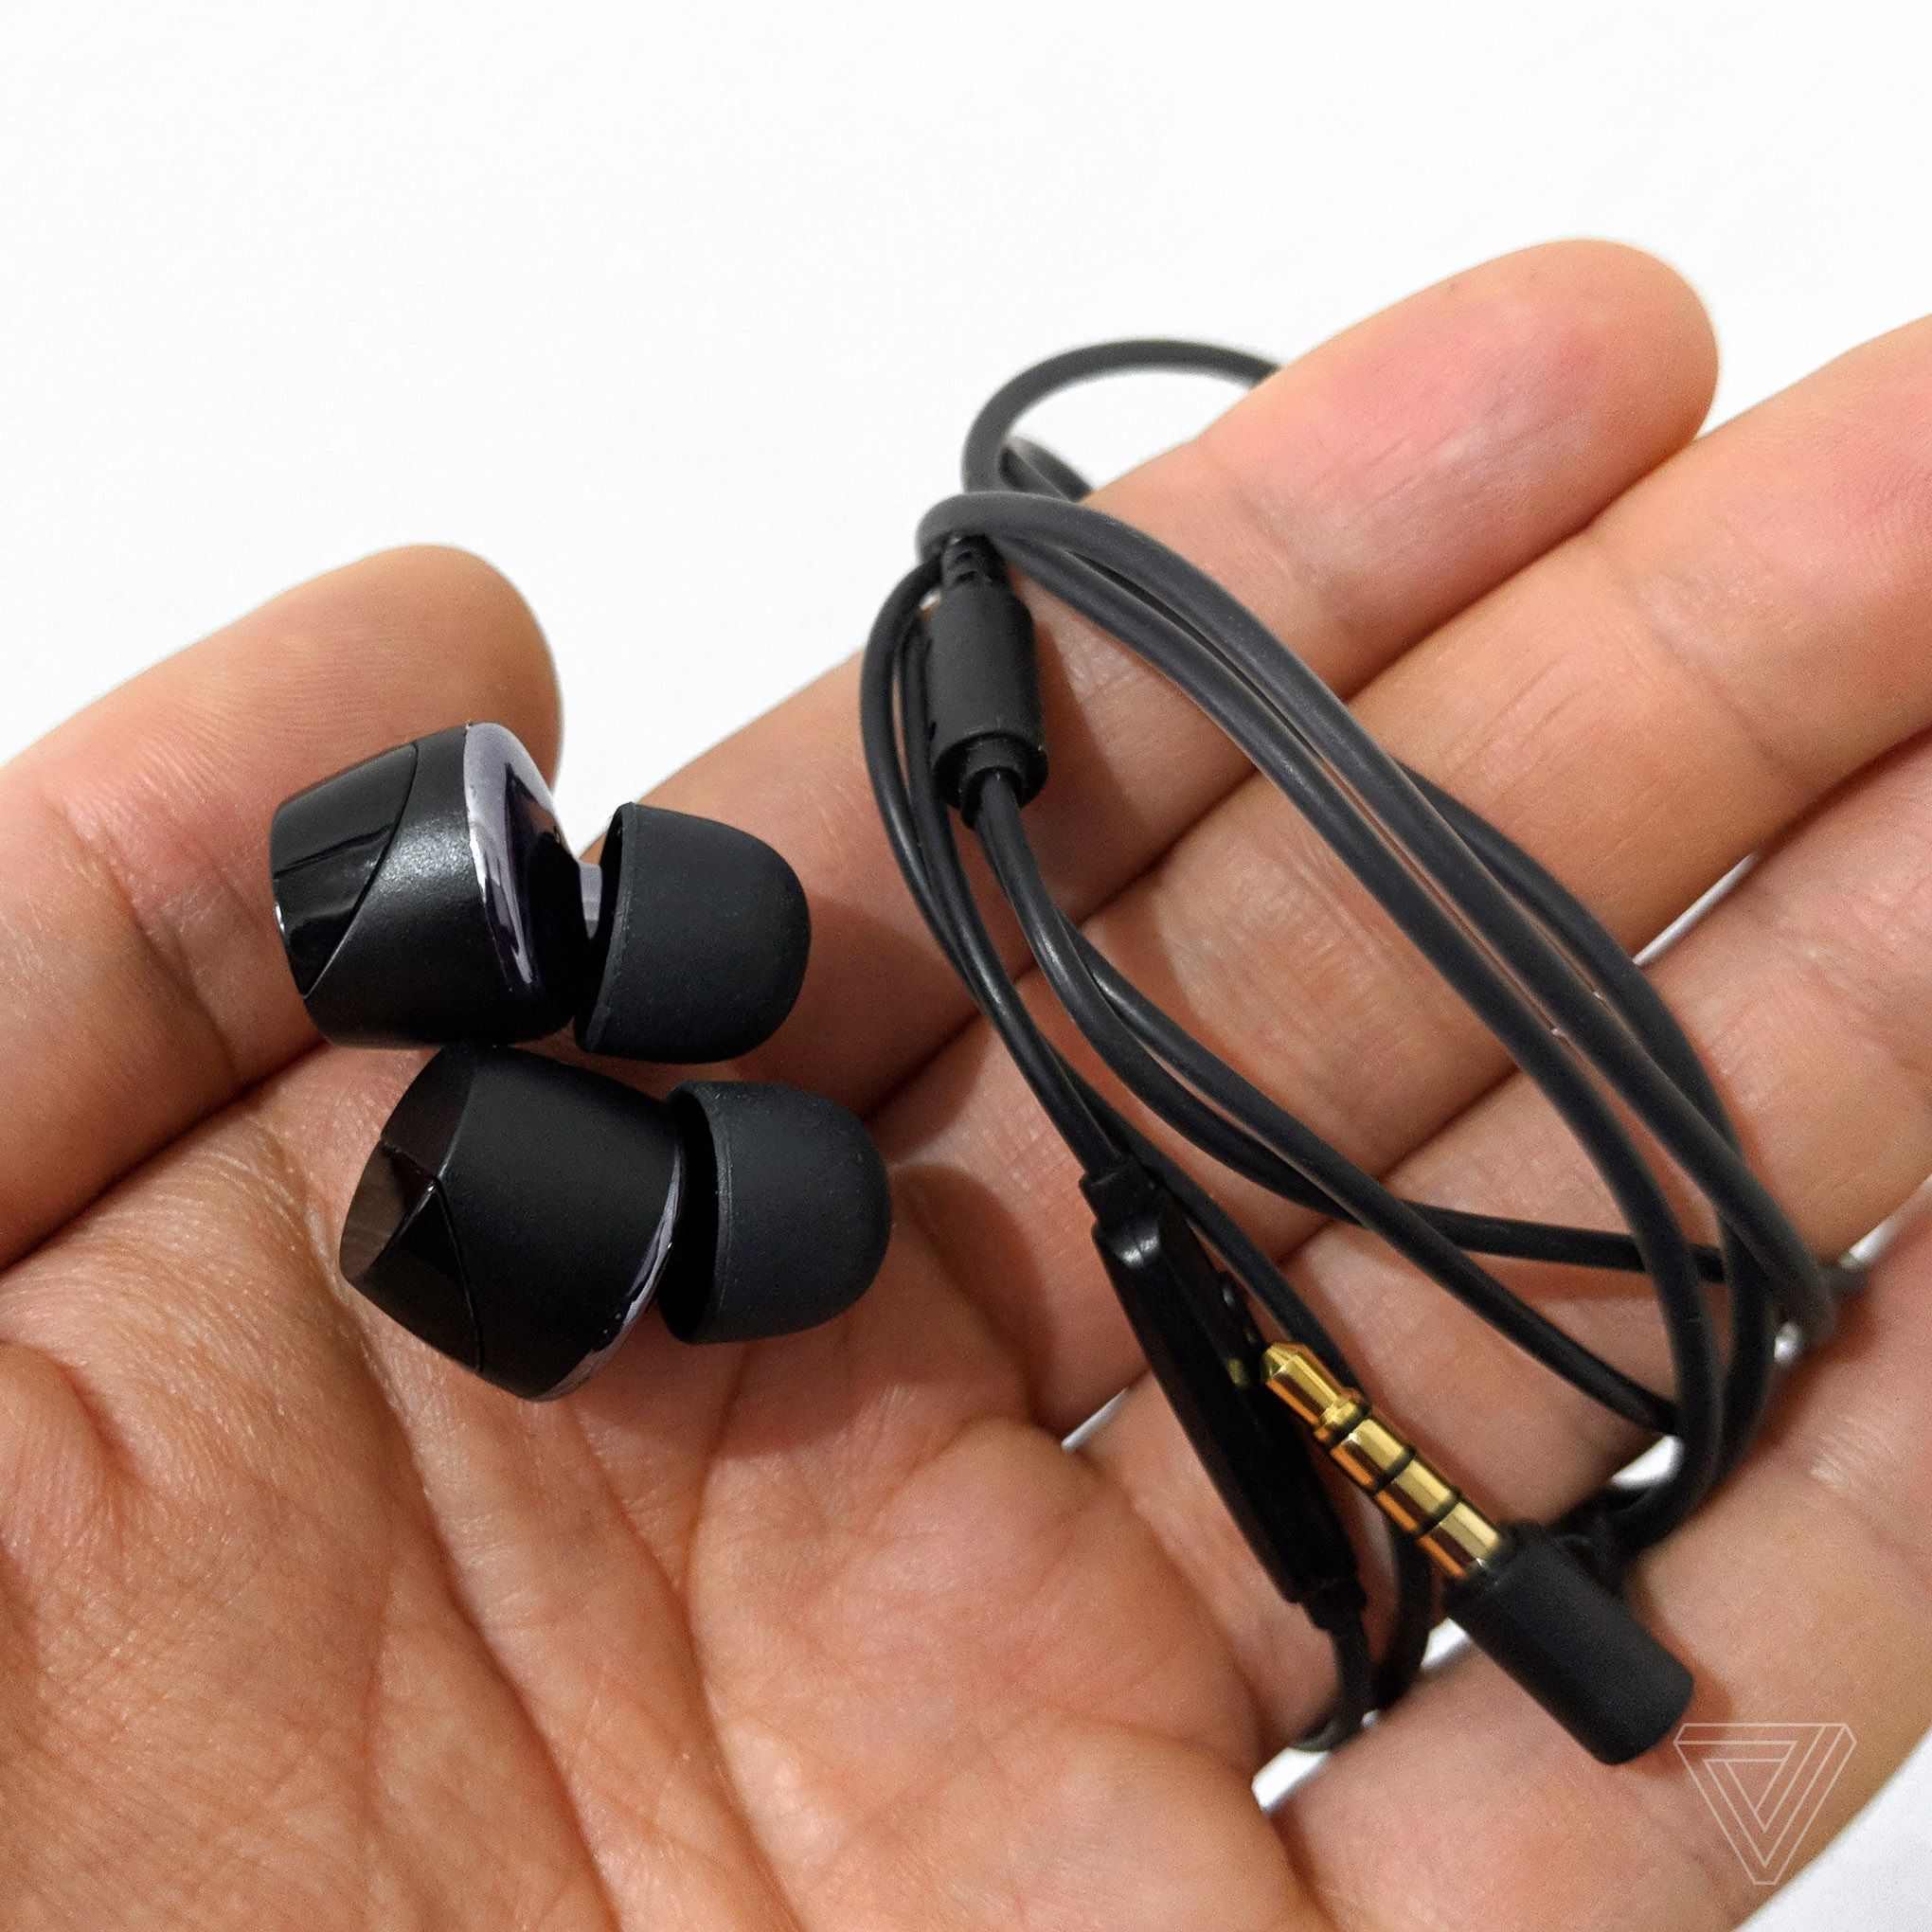 Tunai Drum review: $33 earphones that provide an exciting listen - The